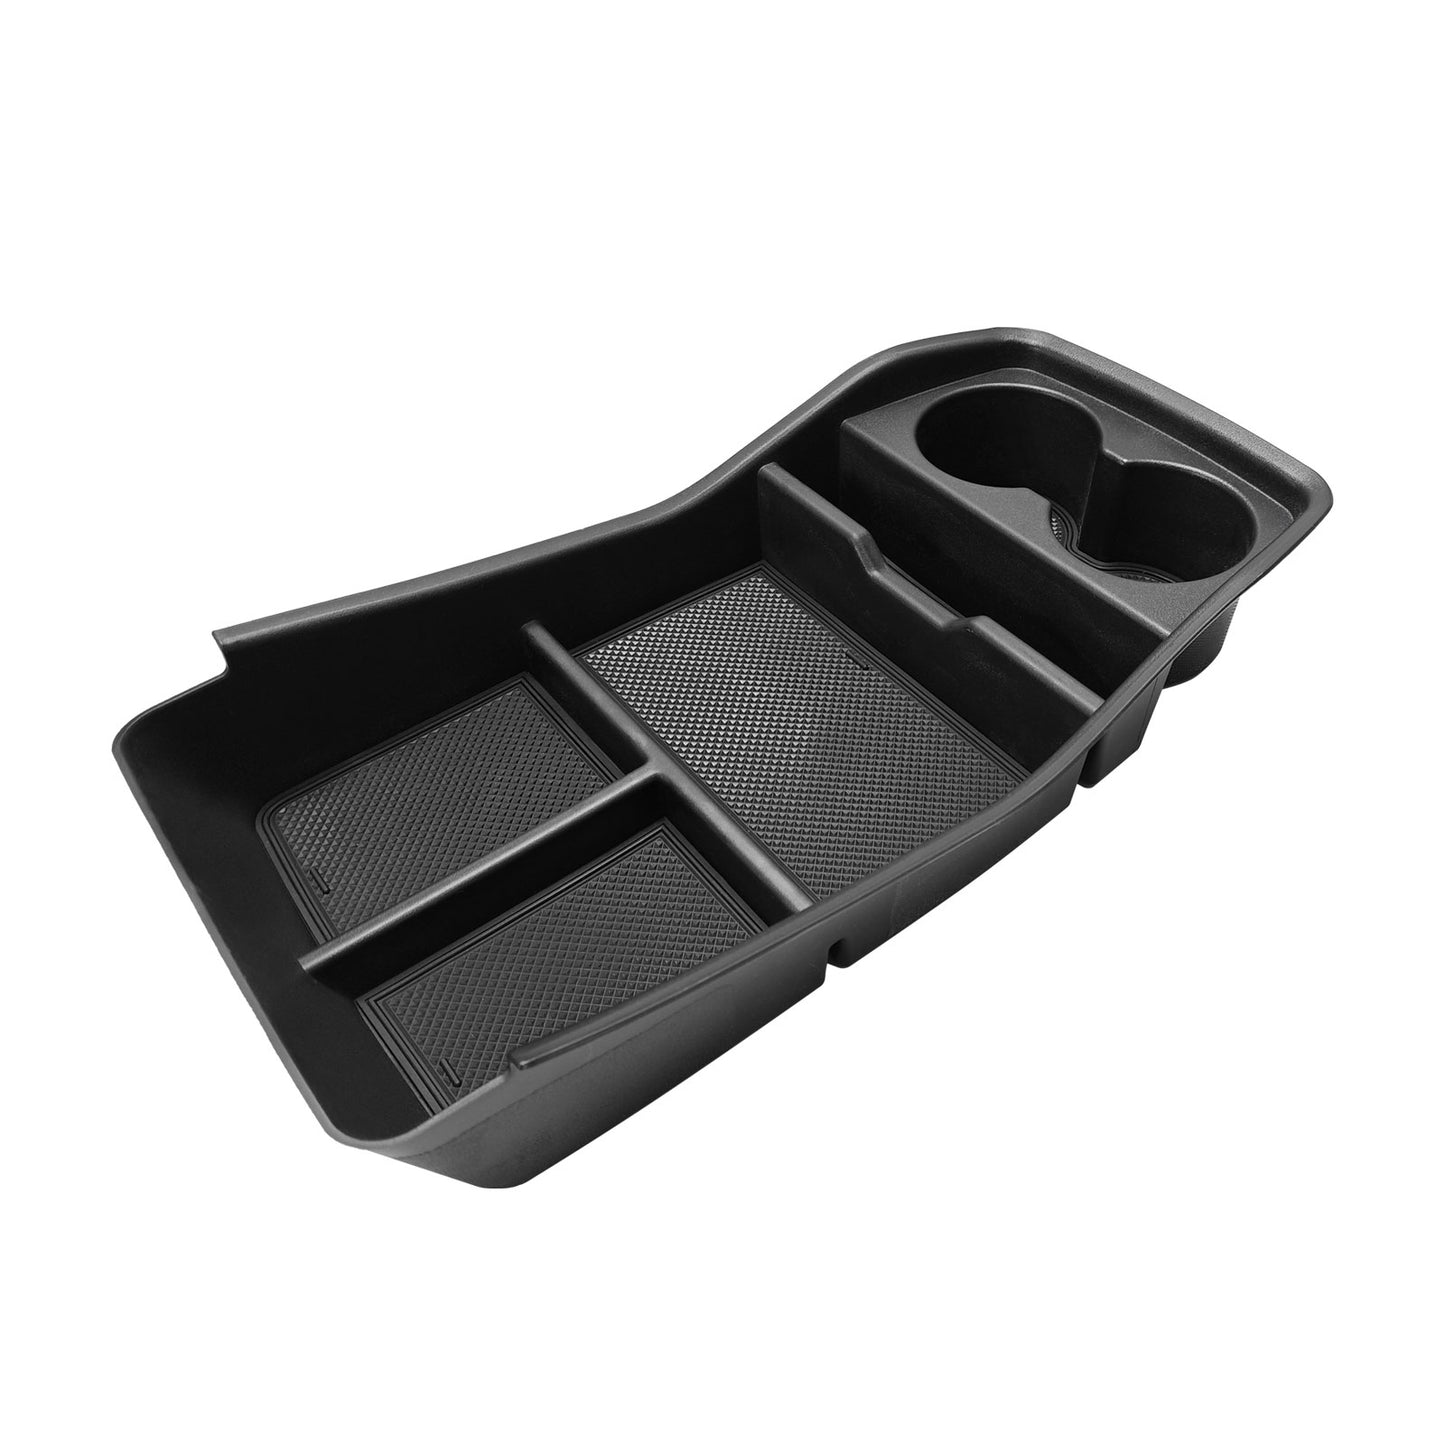 Lower Center Console Organizer Tray for EV9 from BestEvMod